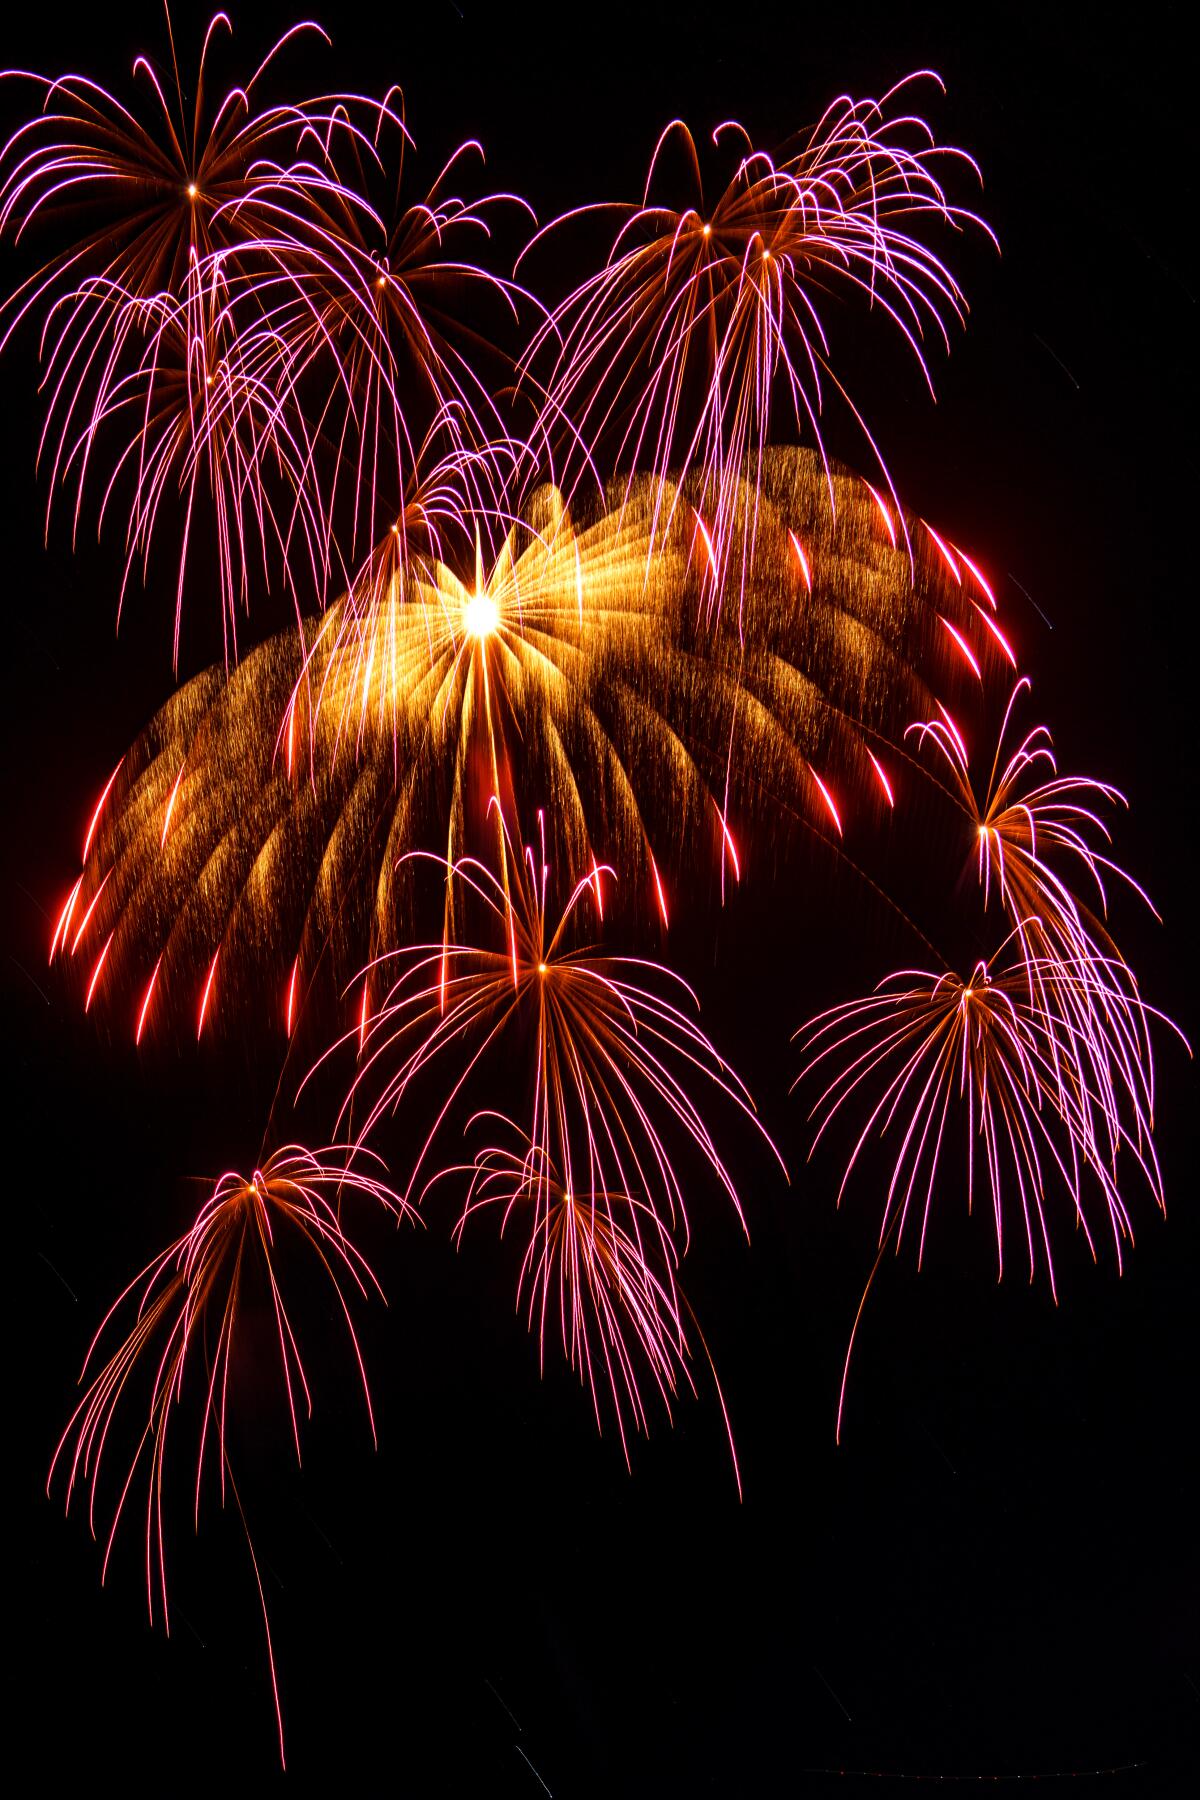 Multiple purple and gold fireworks explode into the night.